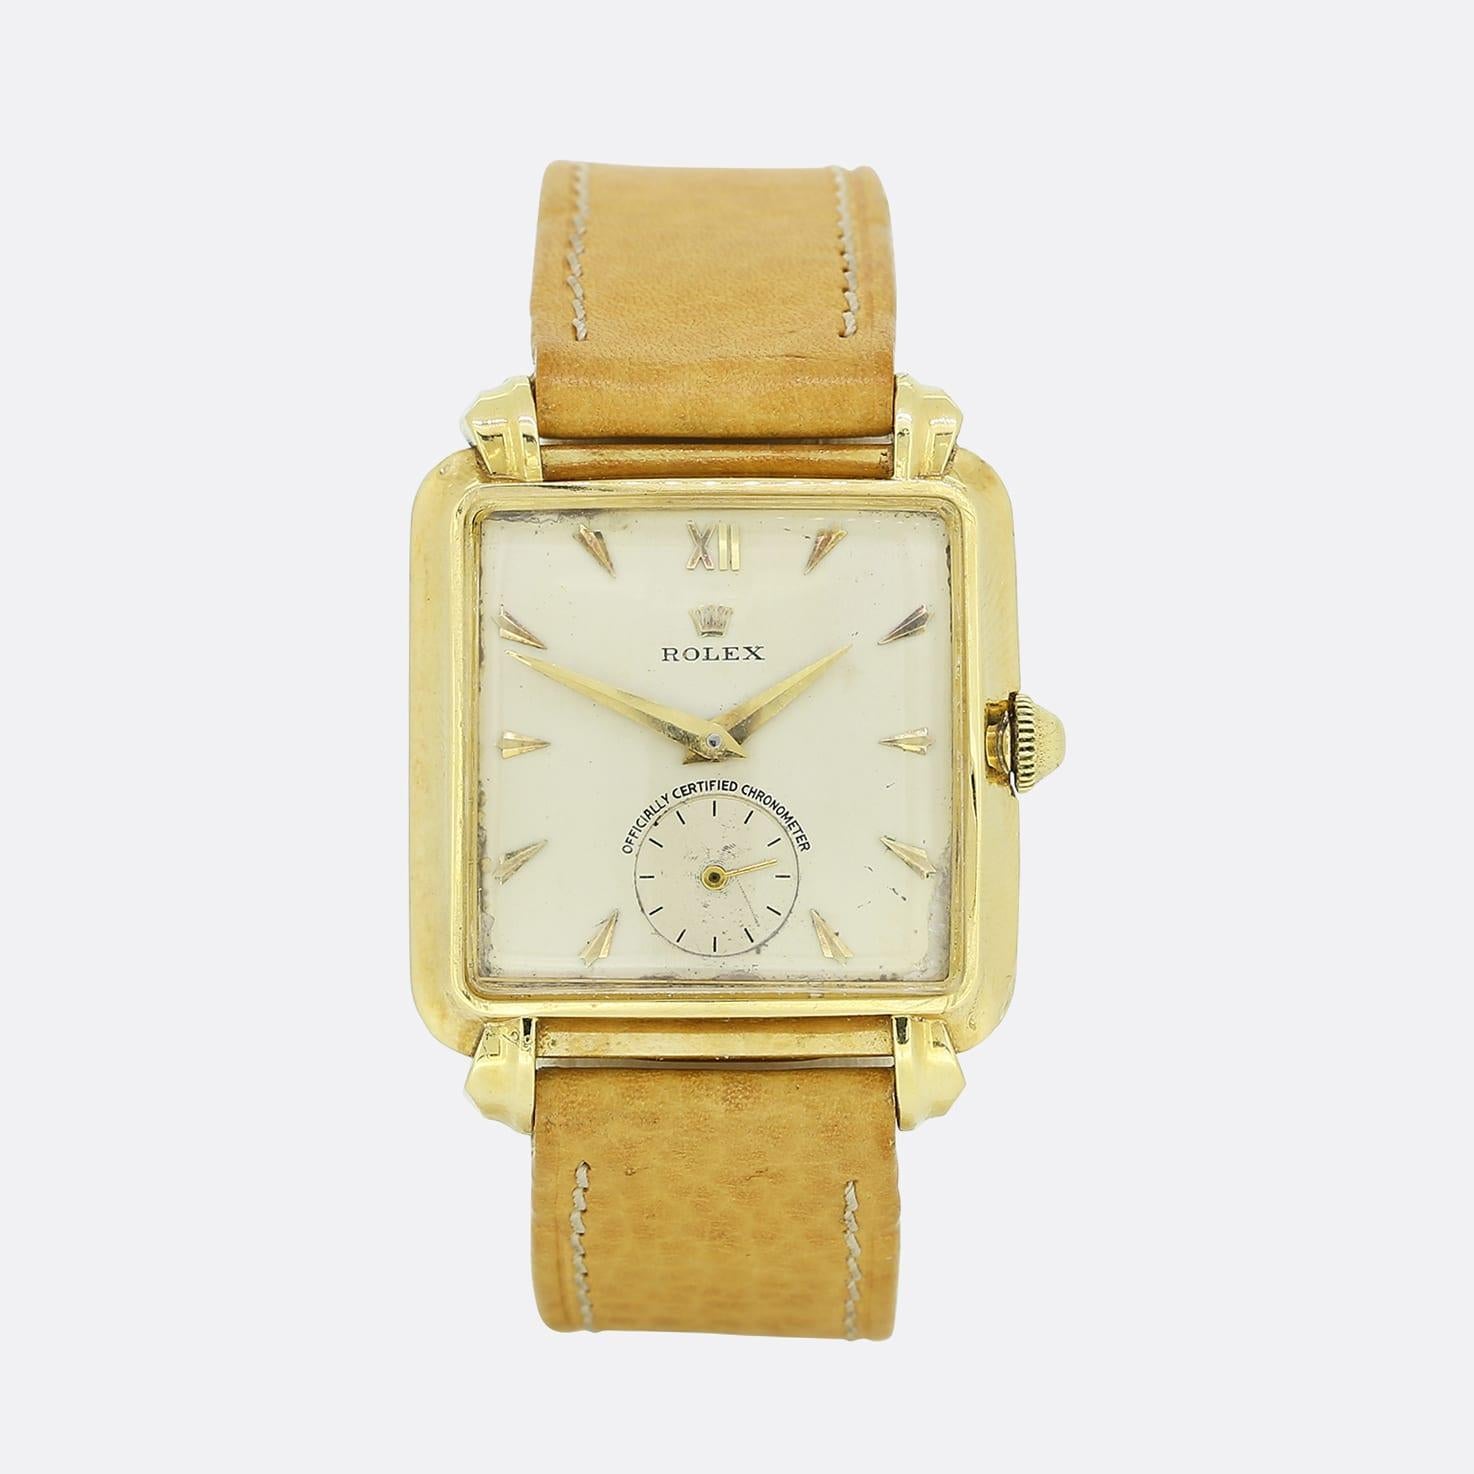 This is an 18ct yellow Rolex Officially Certified Chronometer from the 1930's. The watch has an 18ct yellow gold square case, a cream dial with gold hour markers and Roman numerals at 12 o'clock. The case has the initials EF engraved on the back but